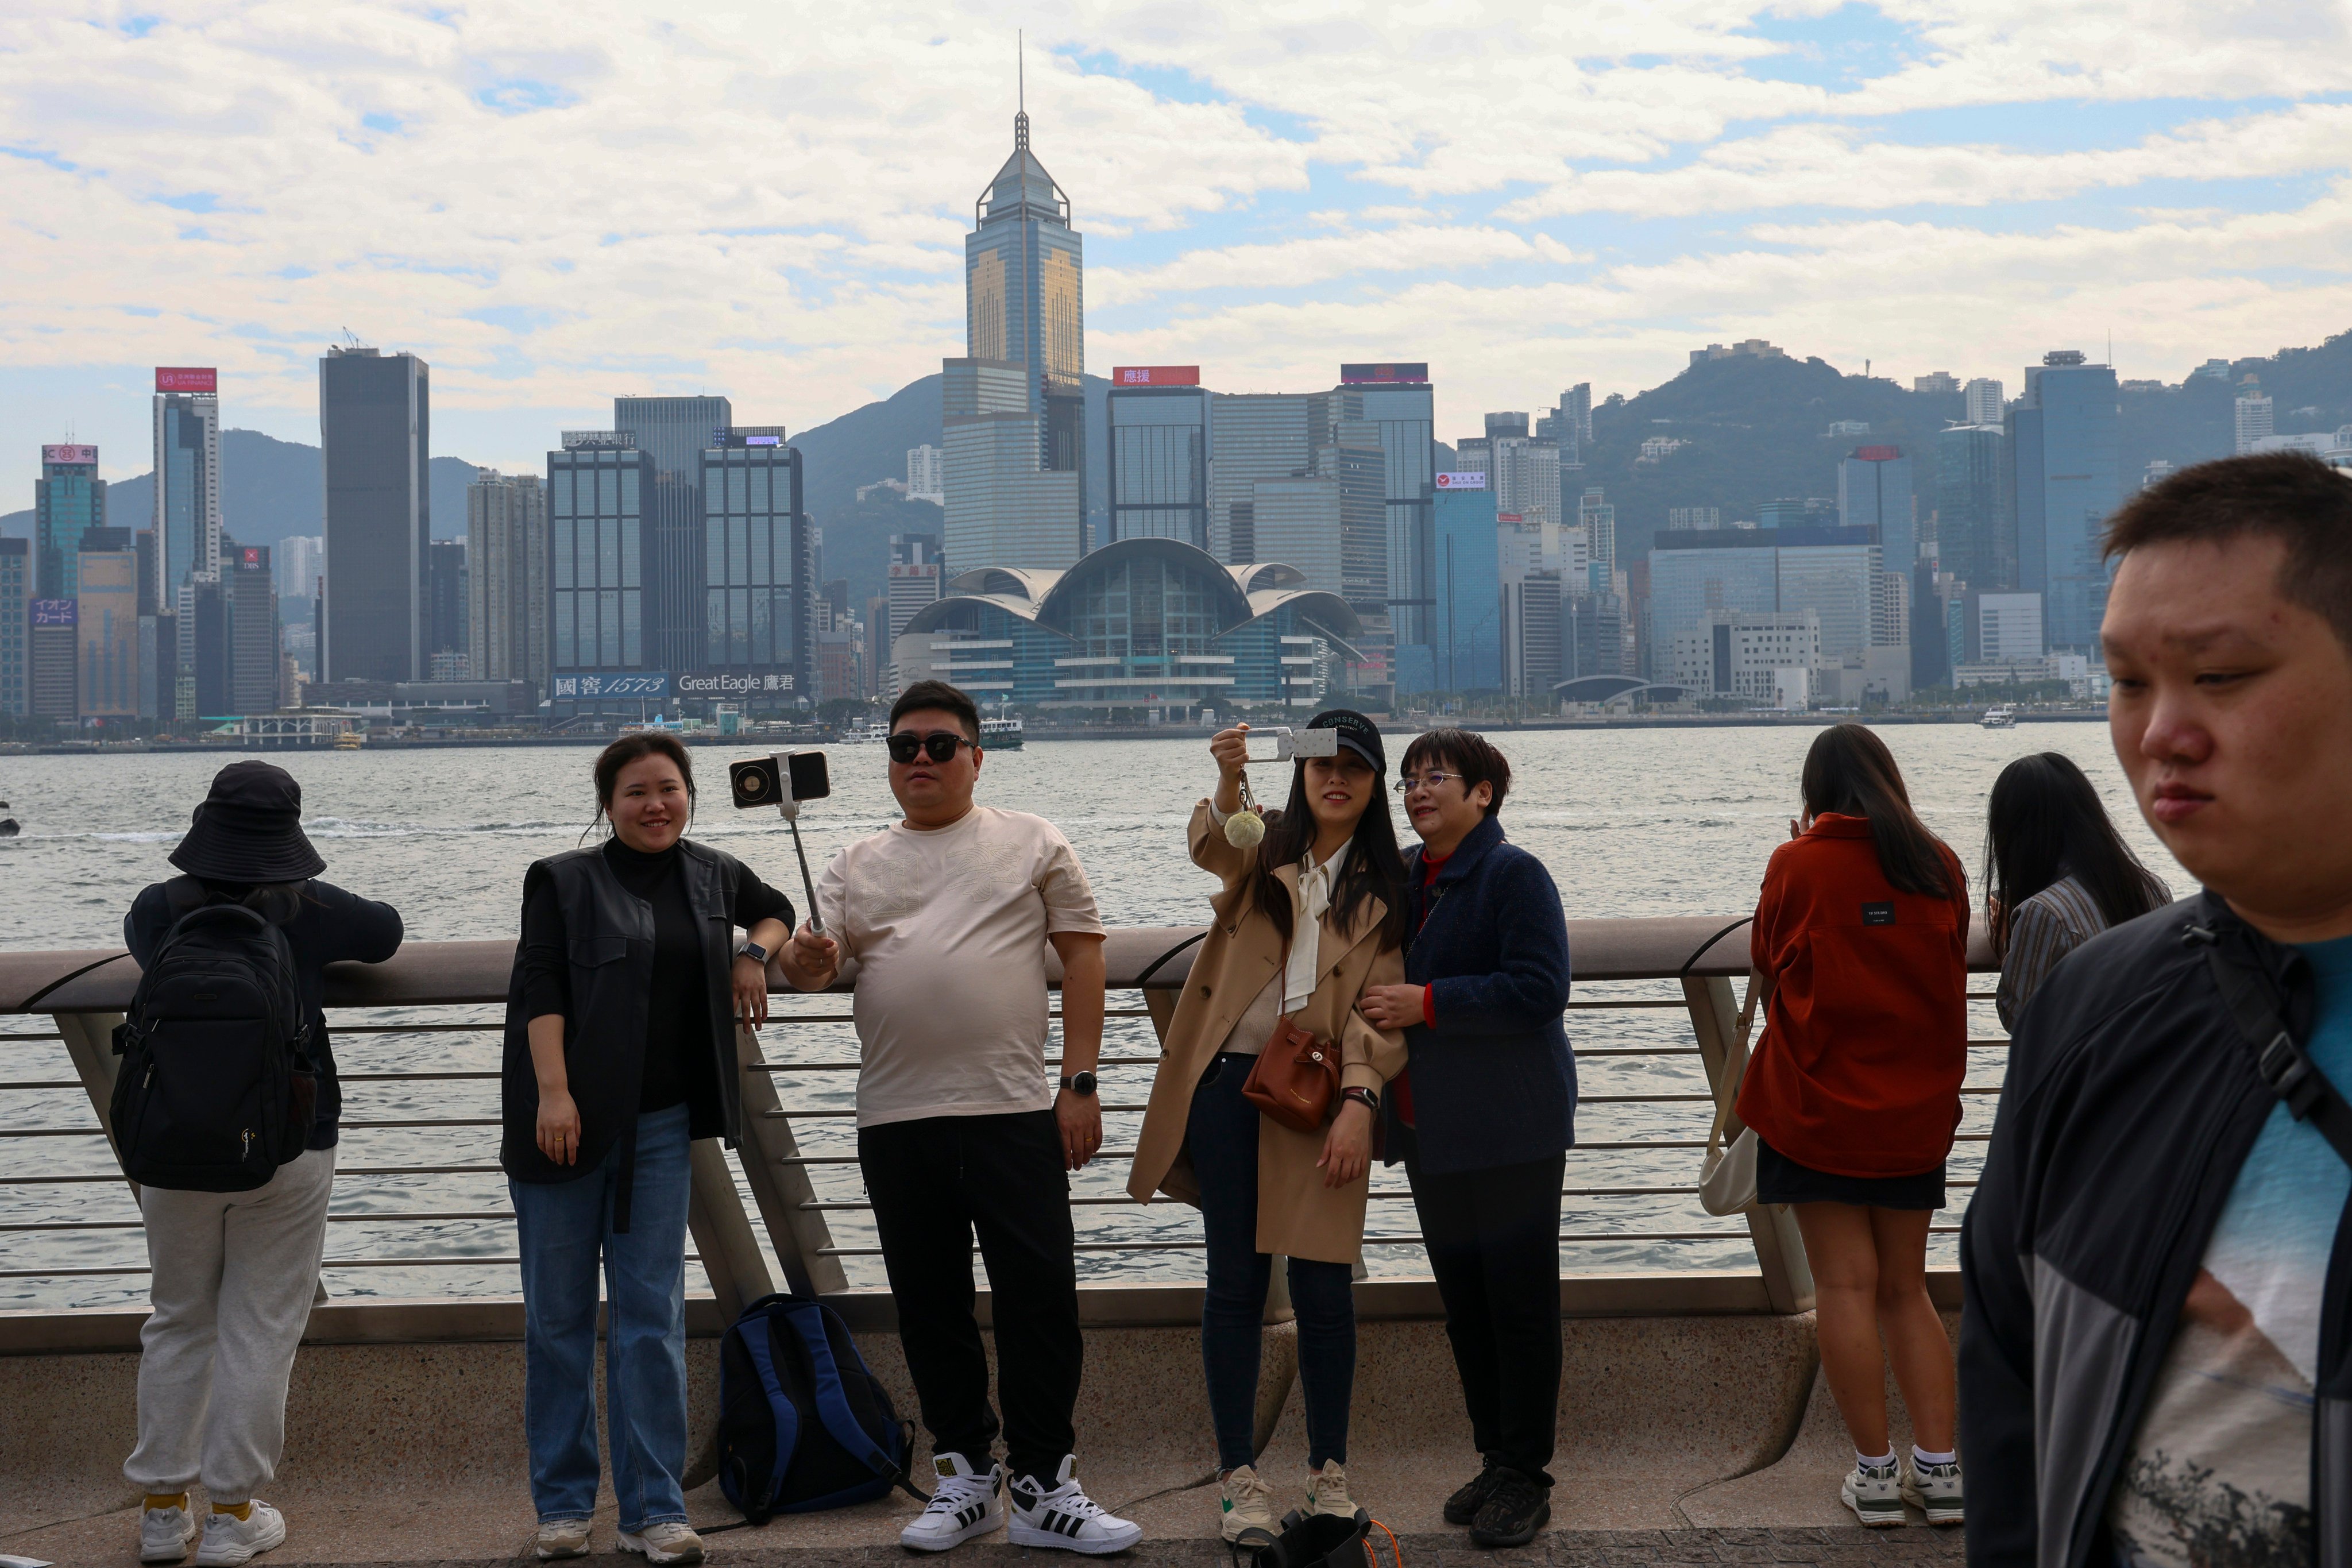 Last year, almost 34 million people visited Hong Kong, including more than 26.8 million from the mainland, according to the Hong Kong Tourism Board. This boosted sales of insurance policies, which jumped significantly compared to the three-year Covid-19 period. Photo: Dickson Lee